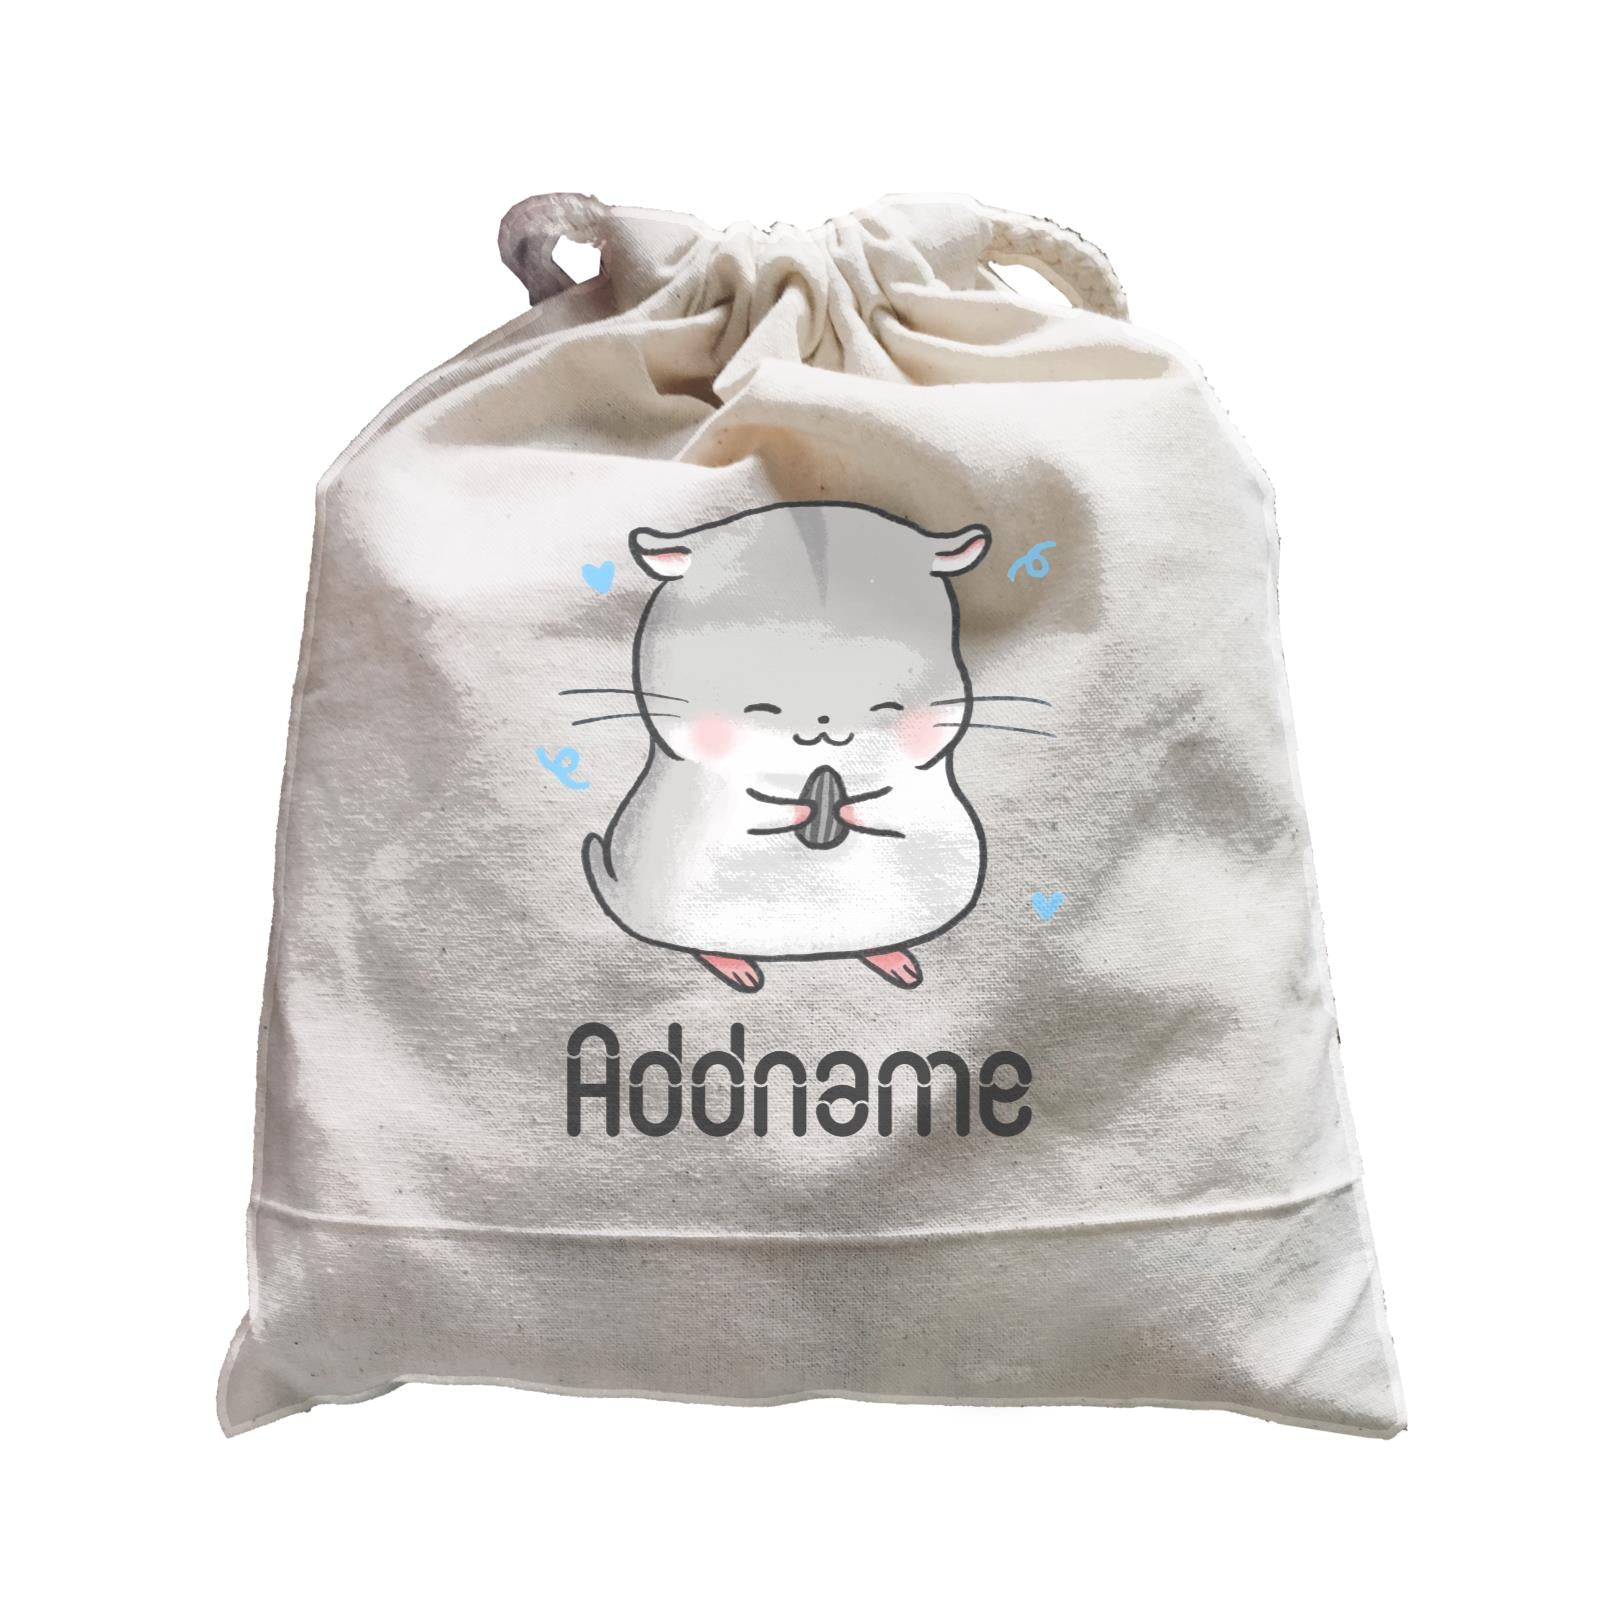 Cute Hand Drawn Style Hamster Addname Satchel